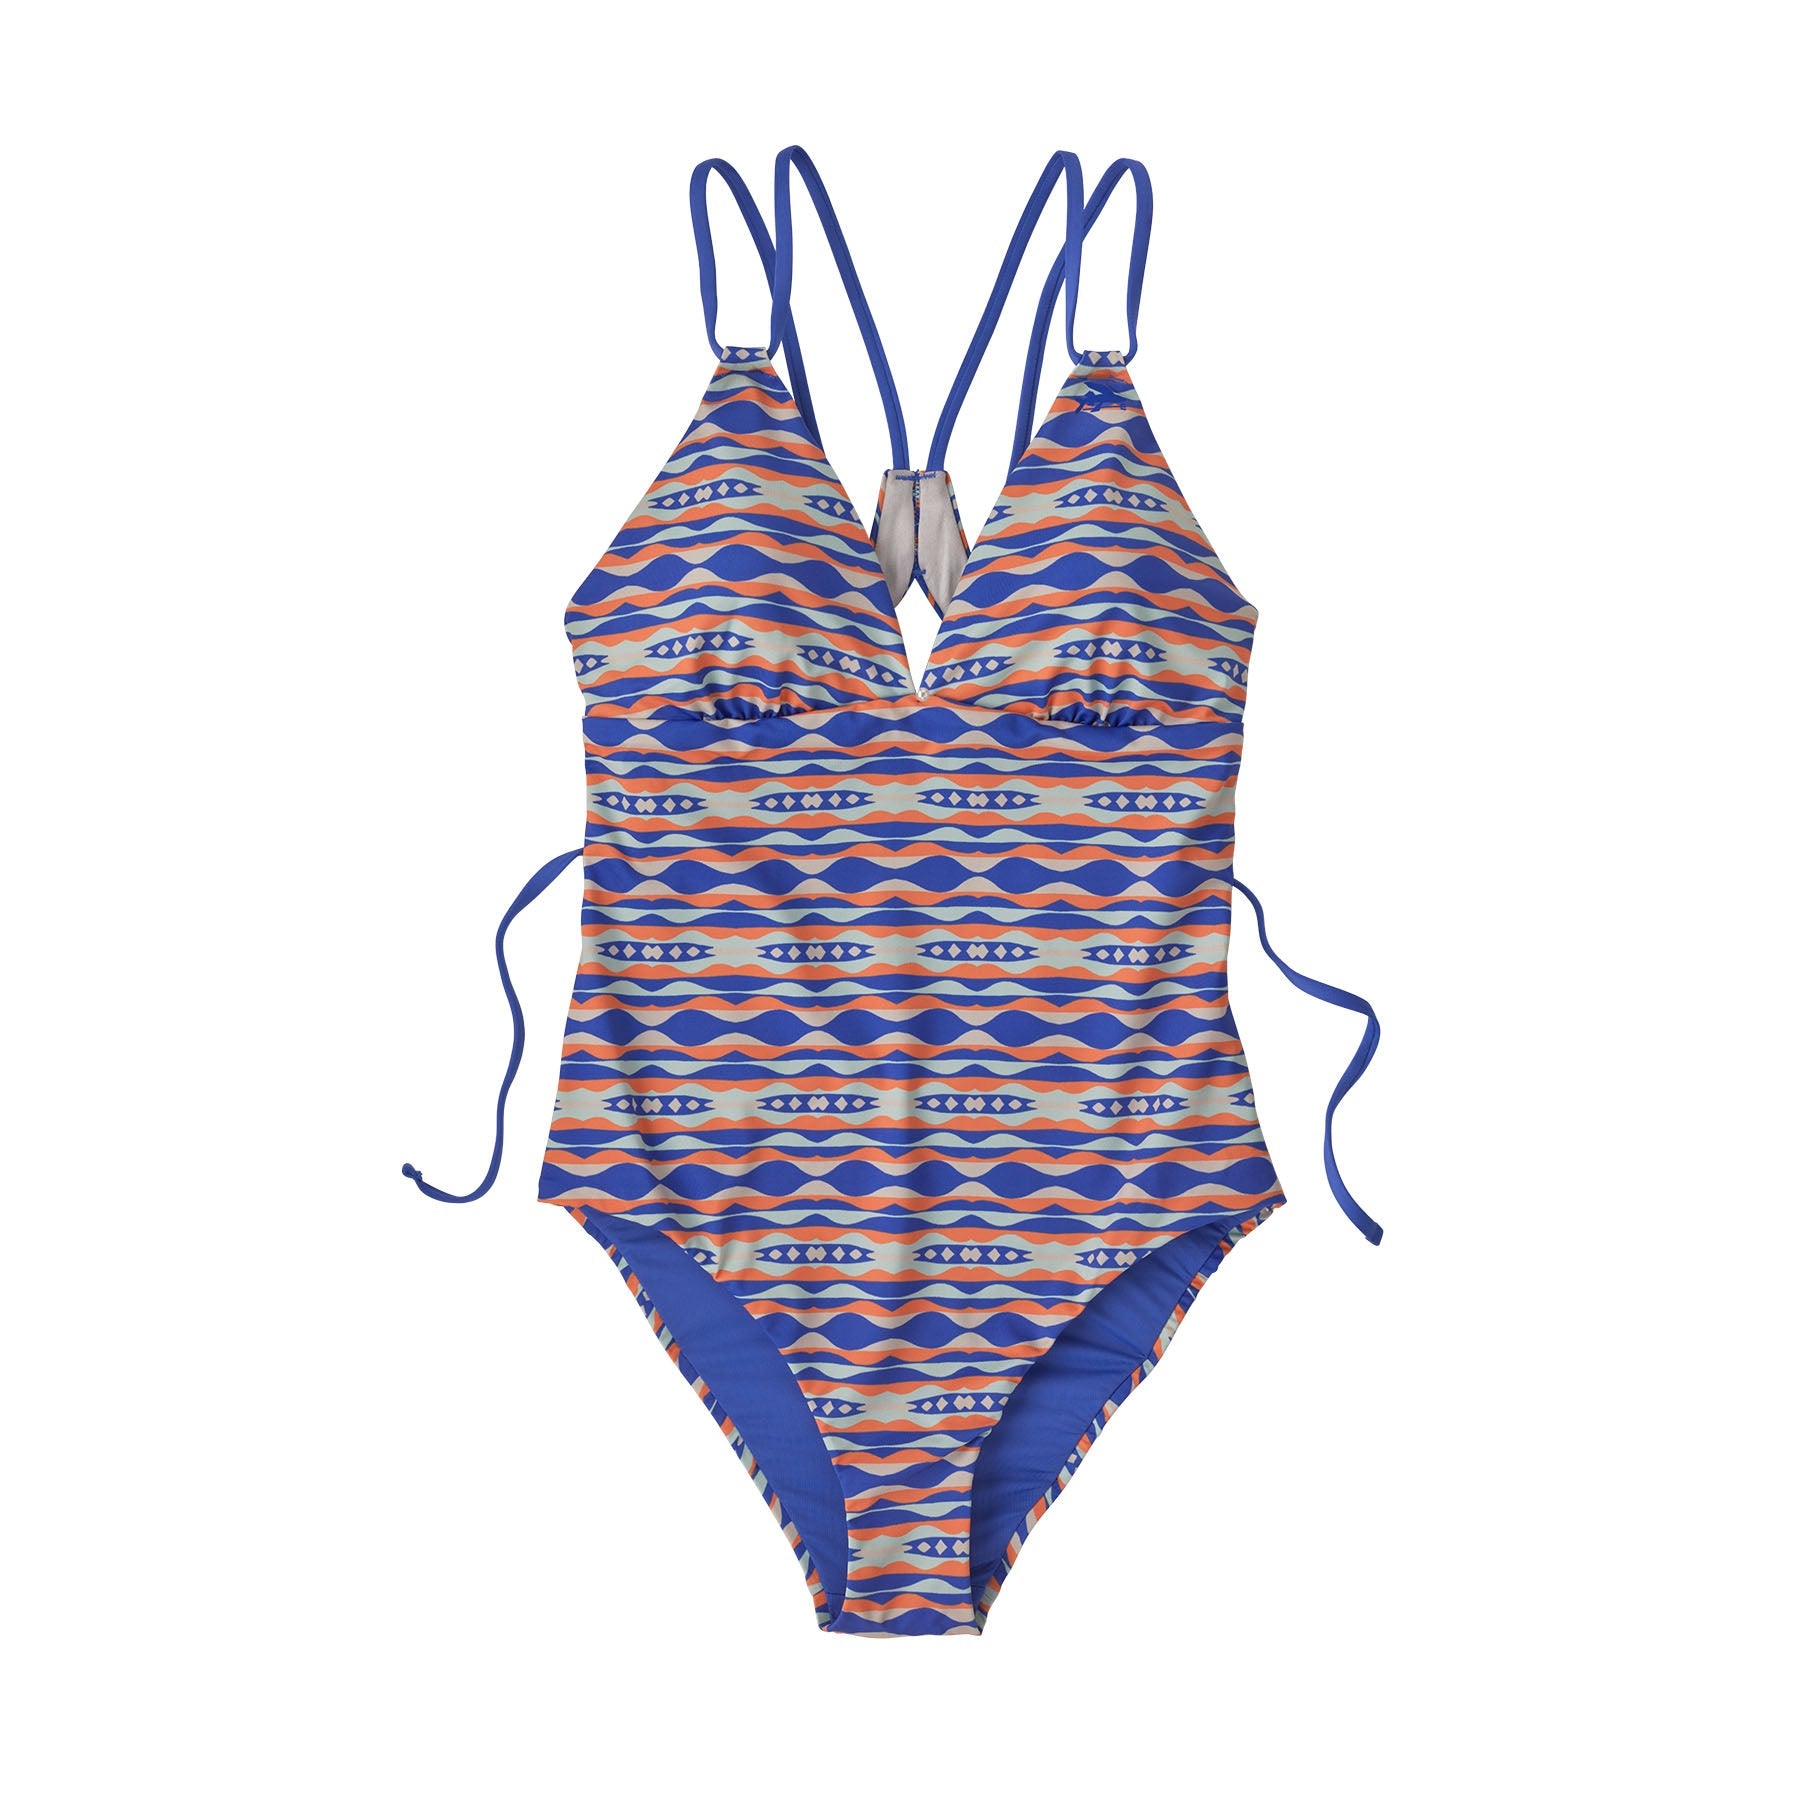 Patagonia Women's Sunny Tide One-Piece Swimsuit